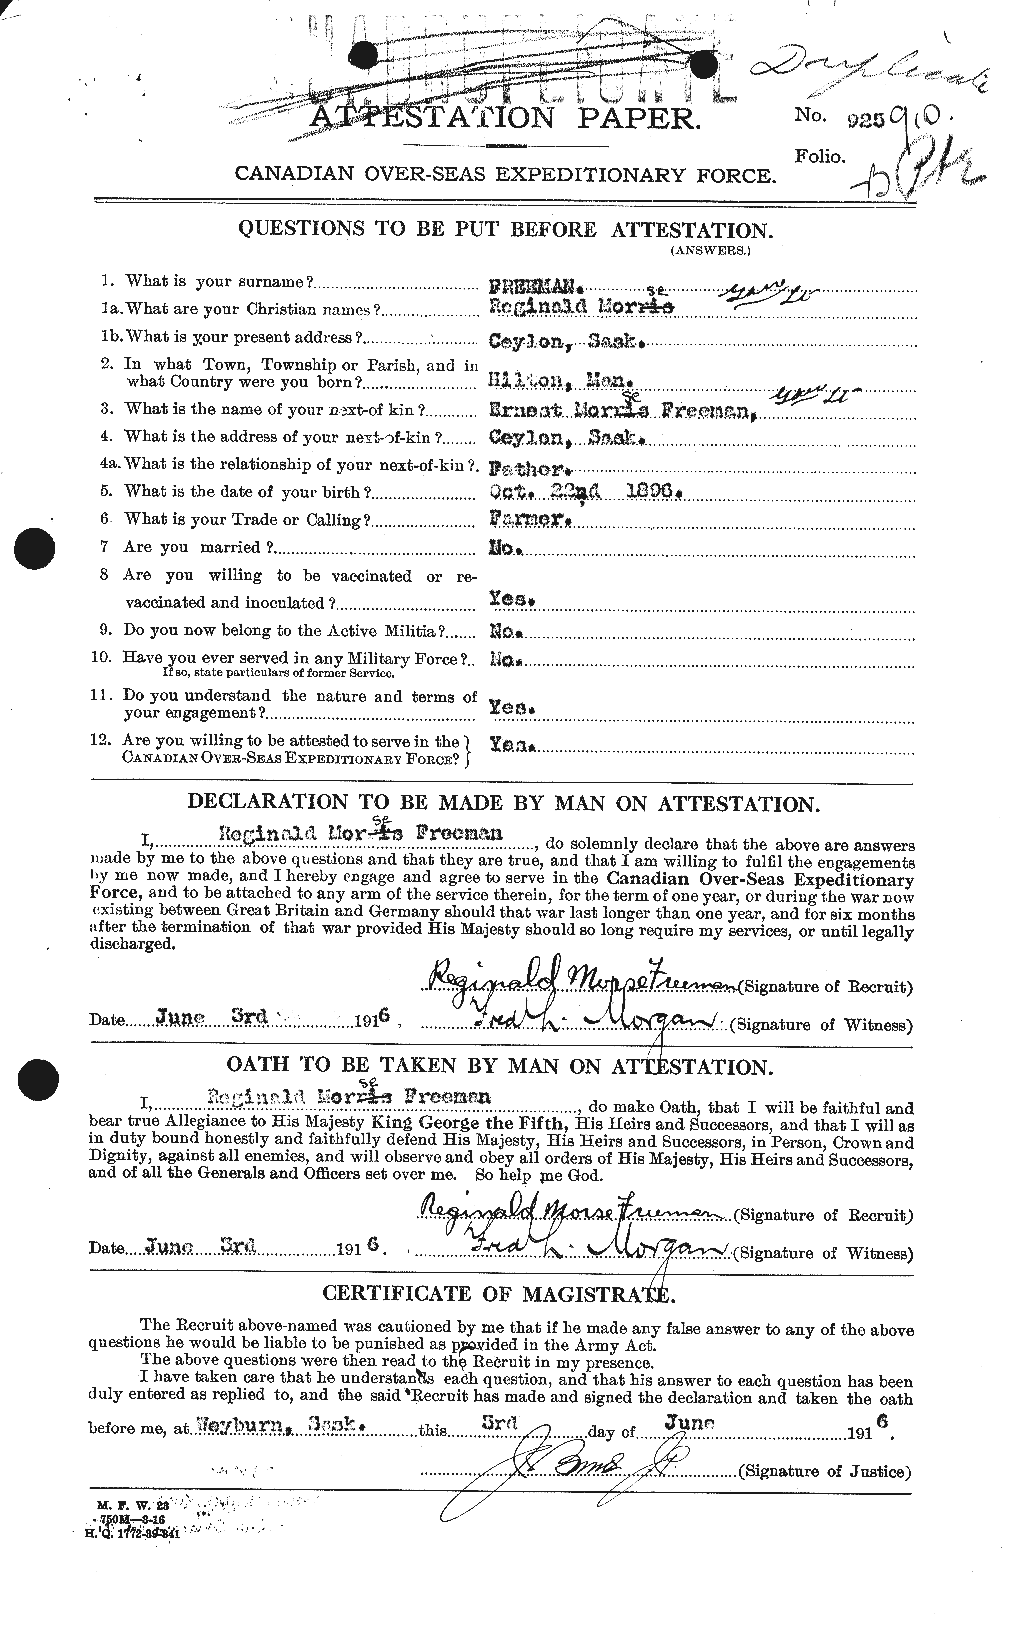 Personnel Records of the First World War - CEF 336604a